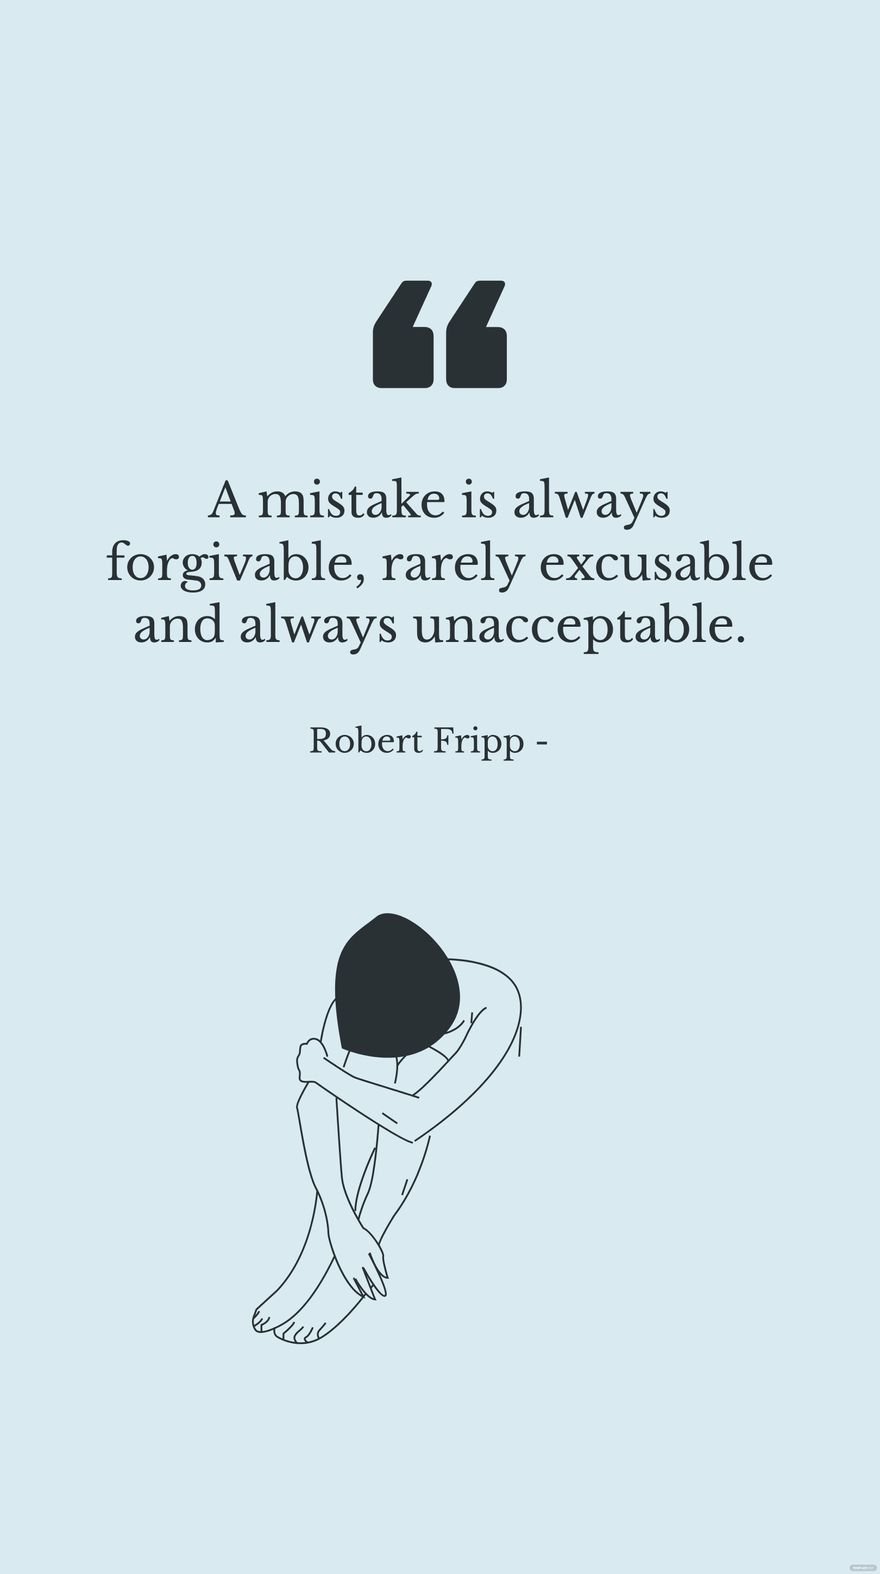 Free Robert Fripp - A mistake is always forgivable, rarely excusable and always unacceptable. in JPG